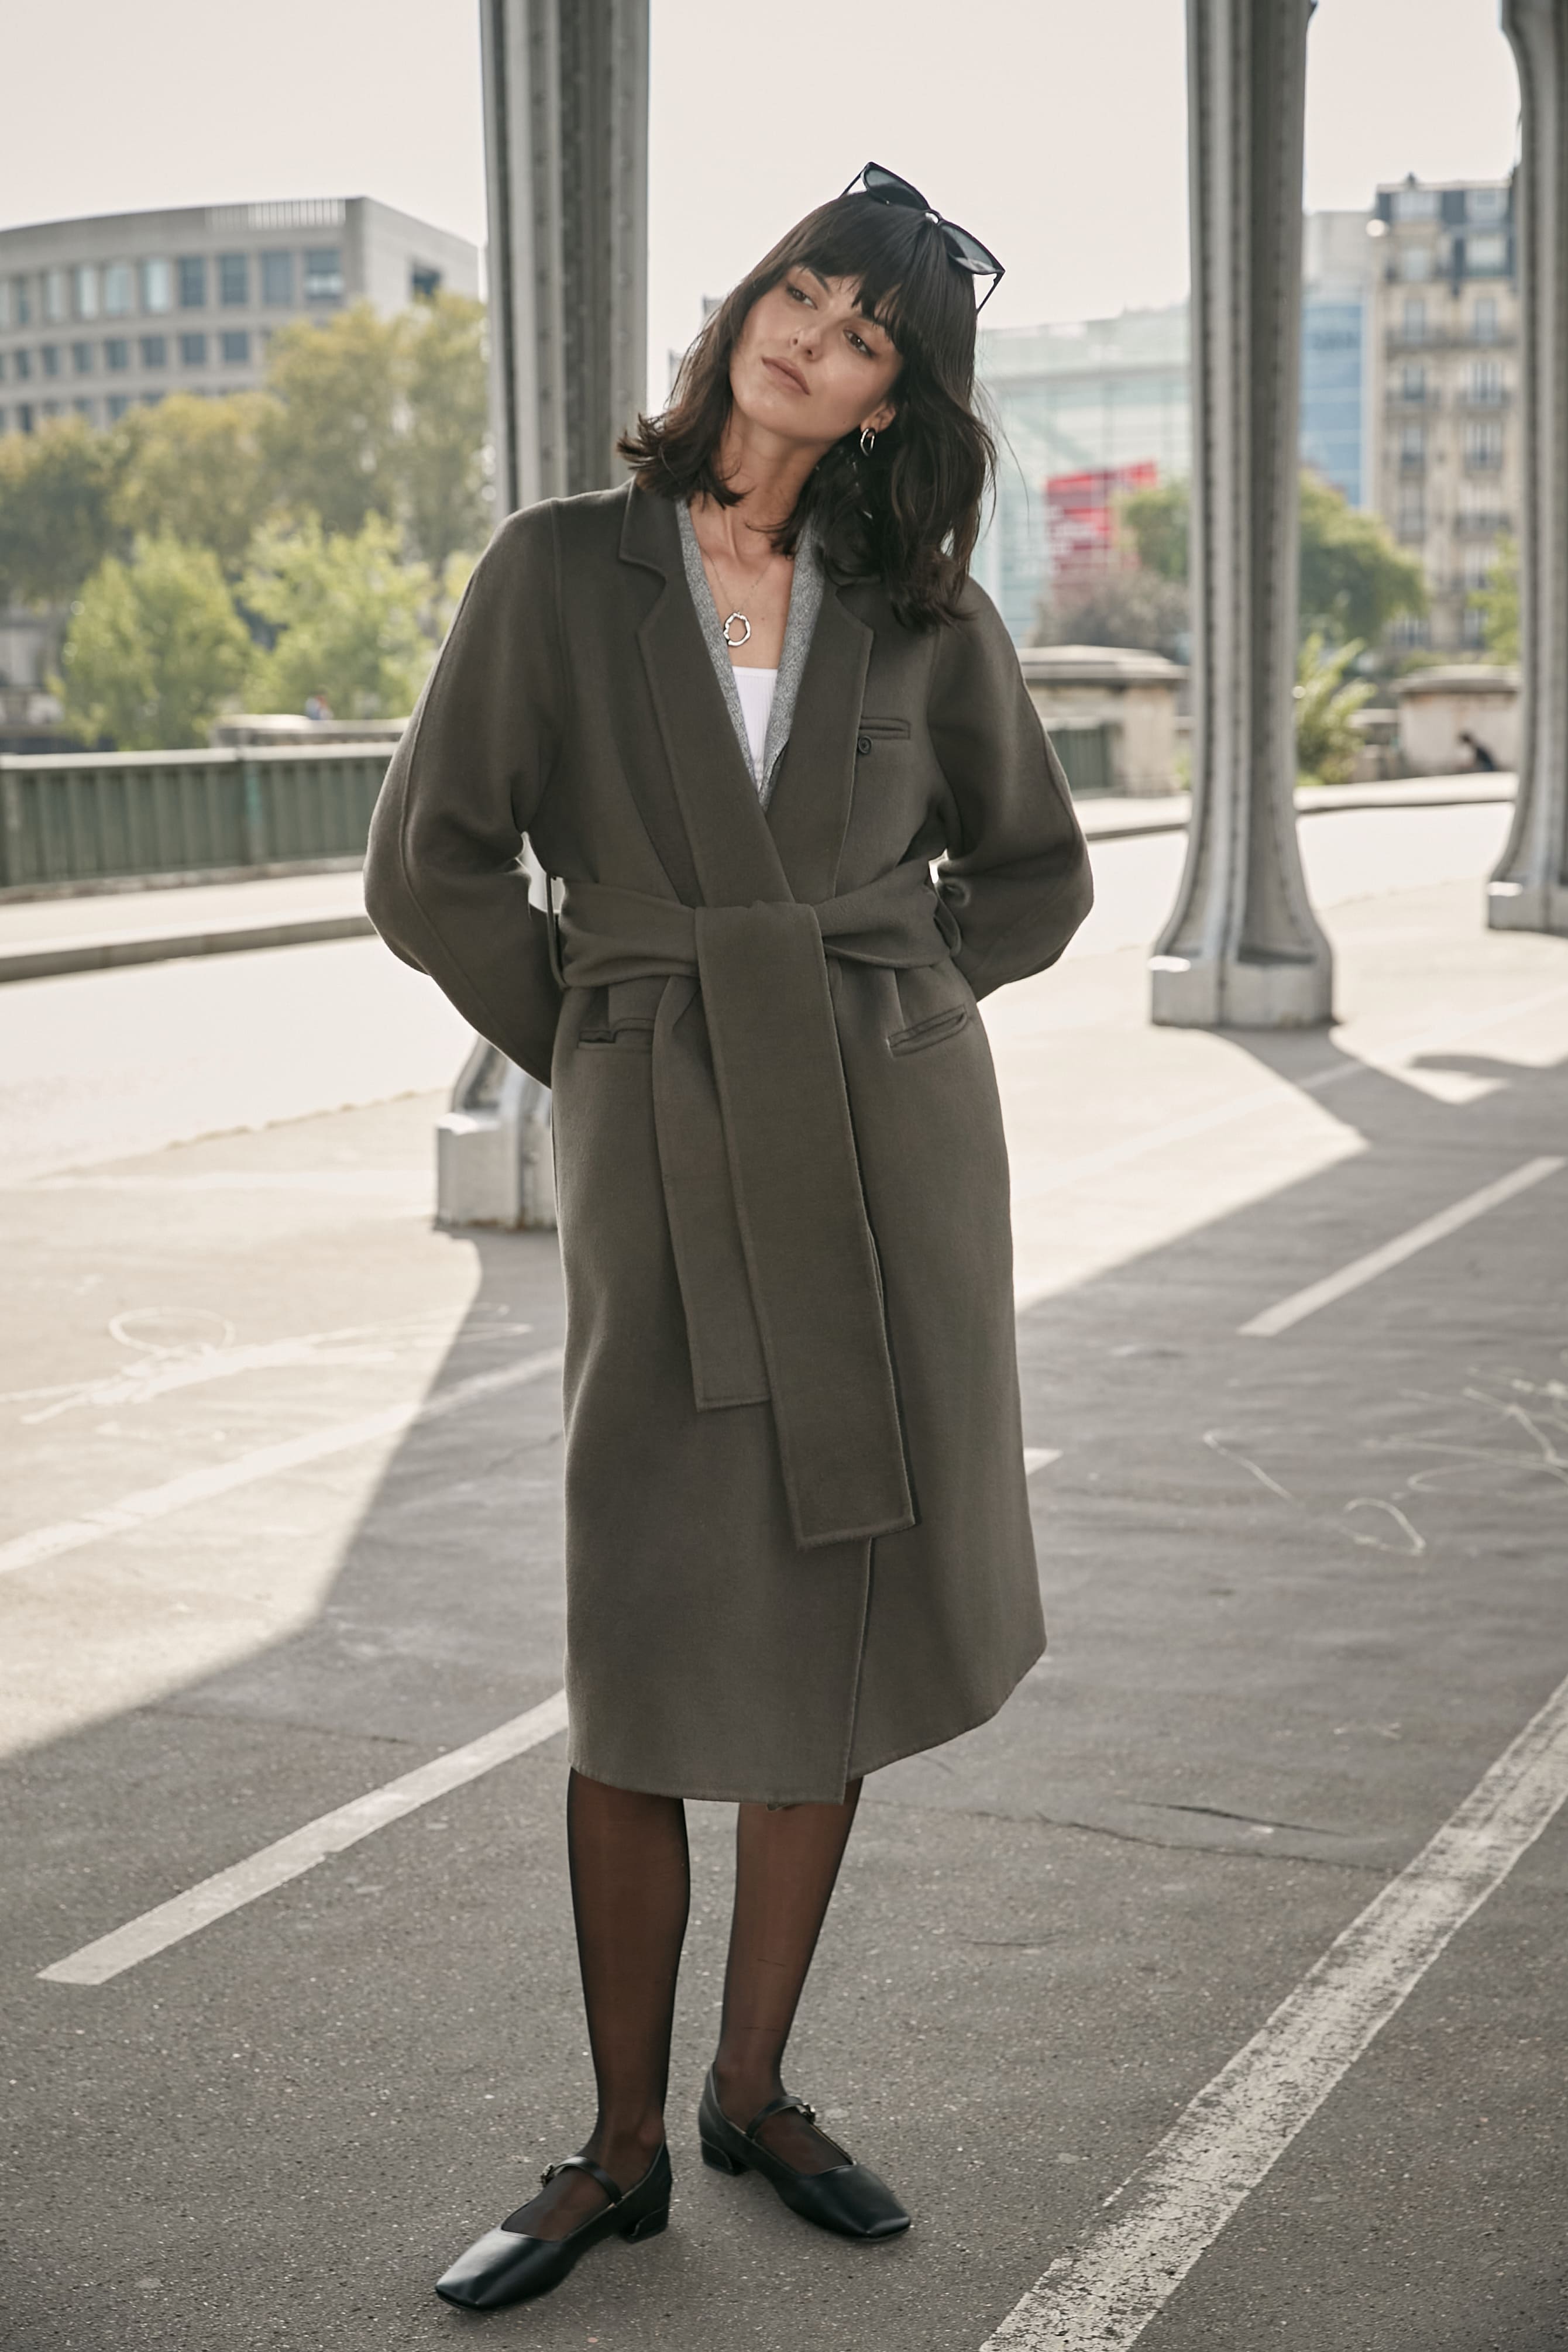 Deep Grey Coat with Pocket Accents and Wide Belt - By Quaint